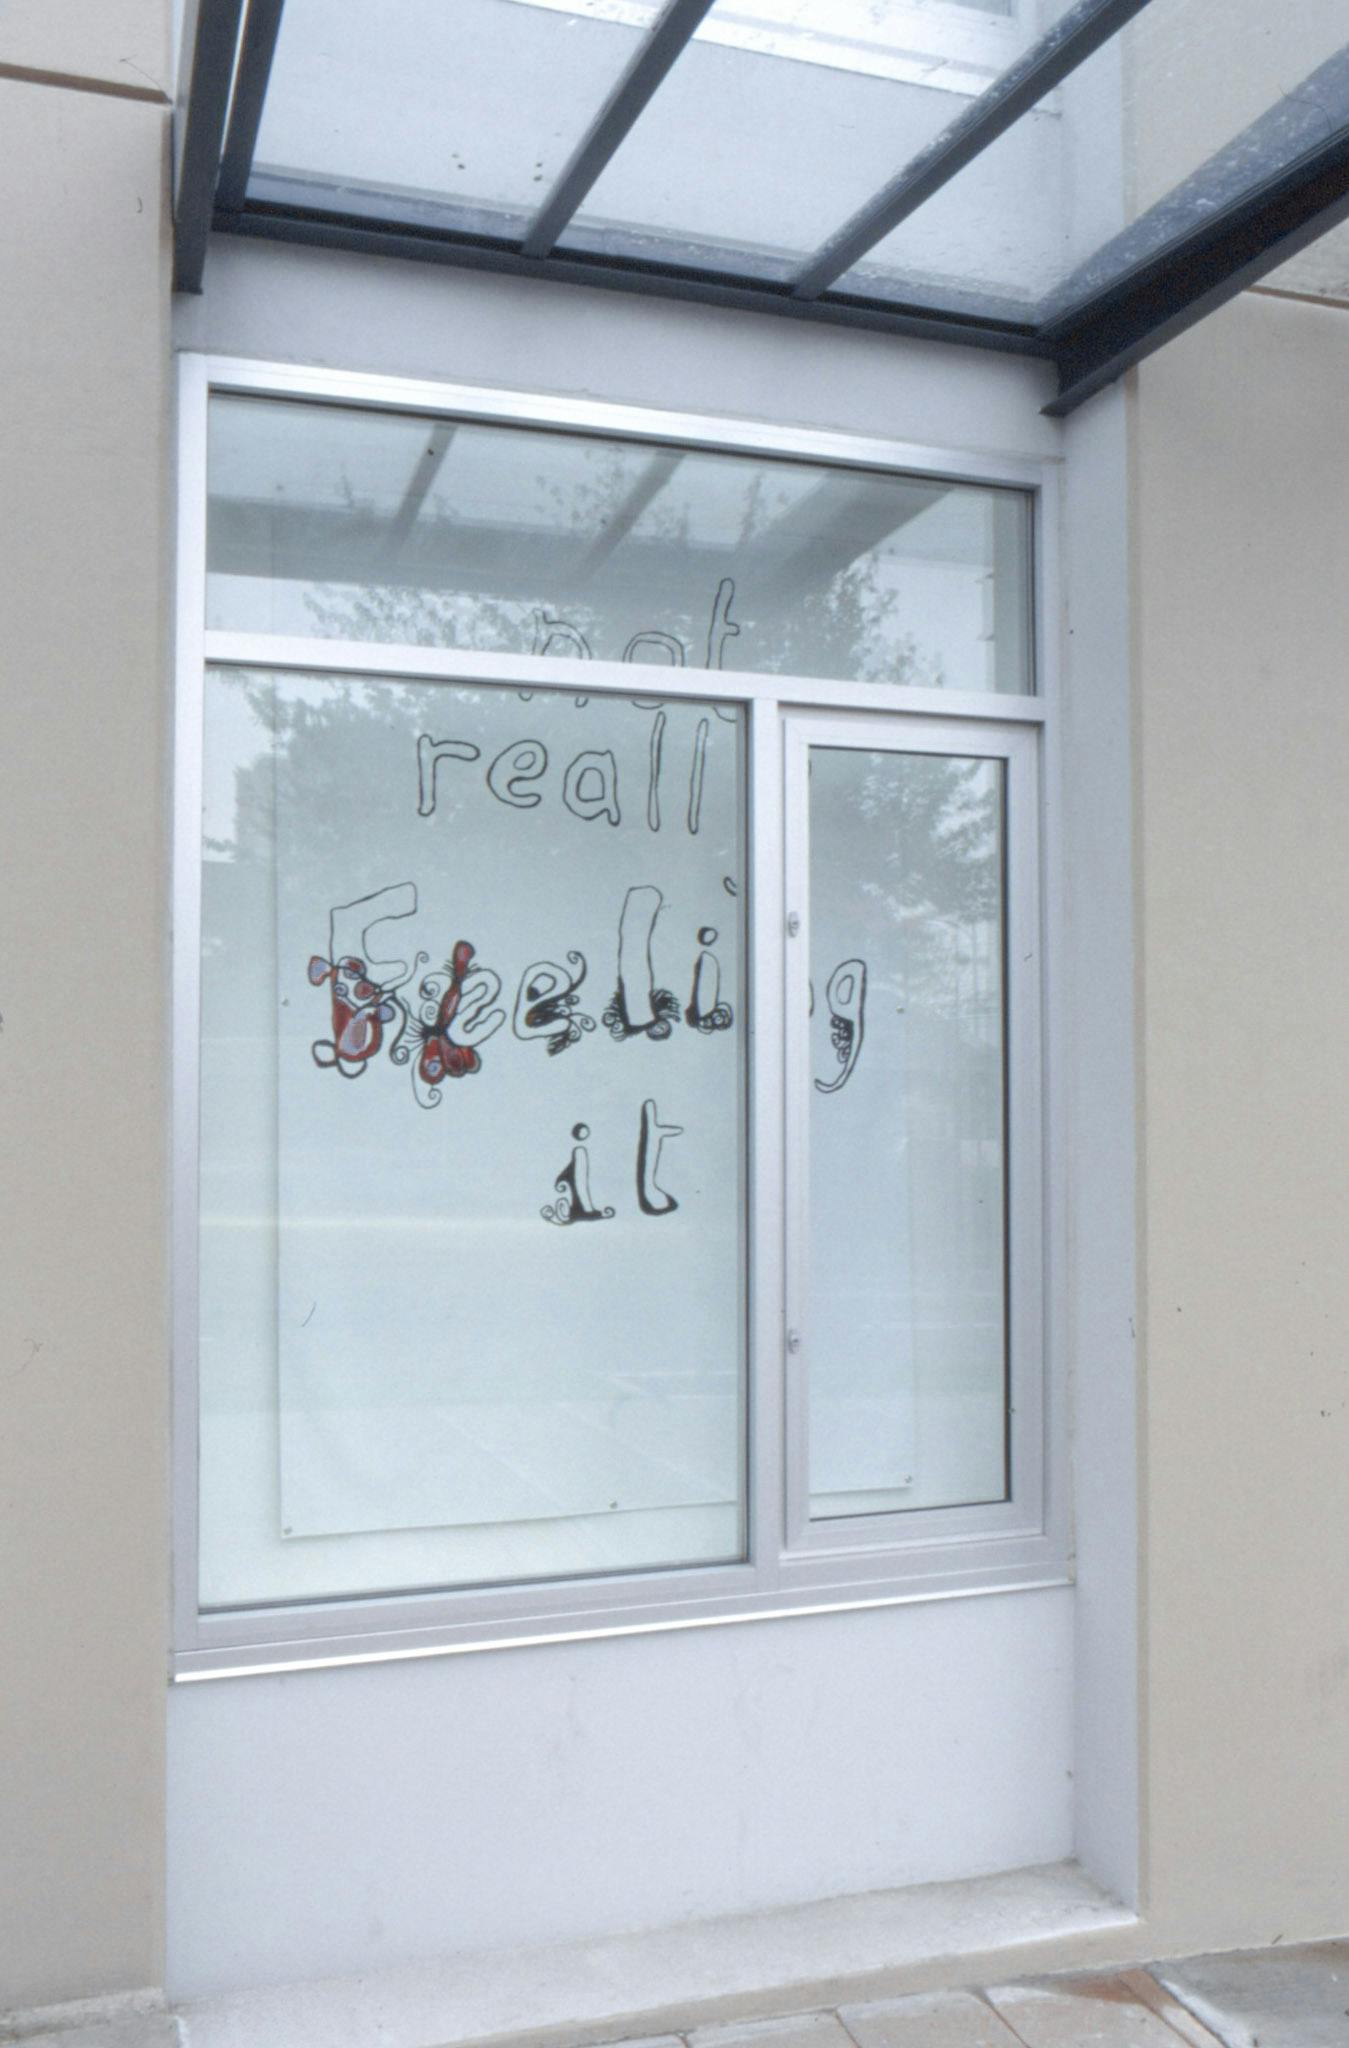 Jill Henderson’s text-based work is installed in one of CAG’s window spaces. The window in this image showcases a handwritten text that reads “not really feeling it” behind the silver window frame. 